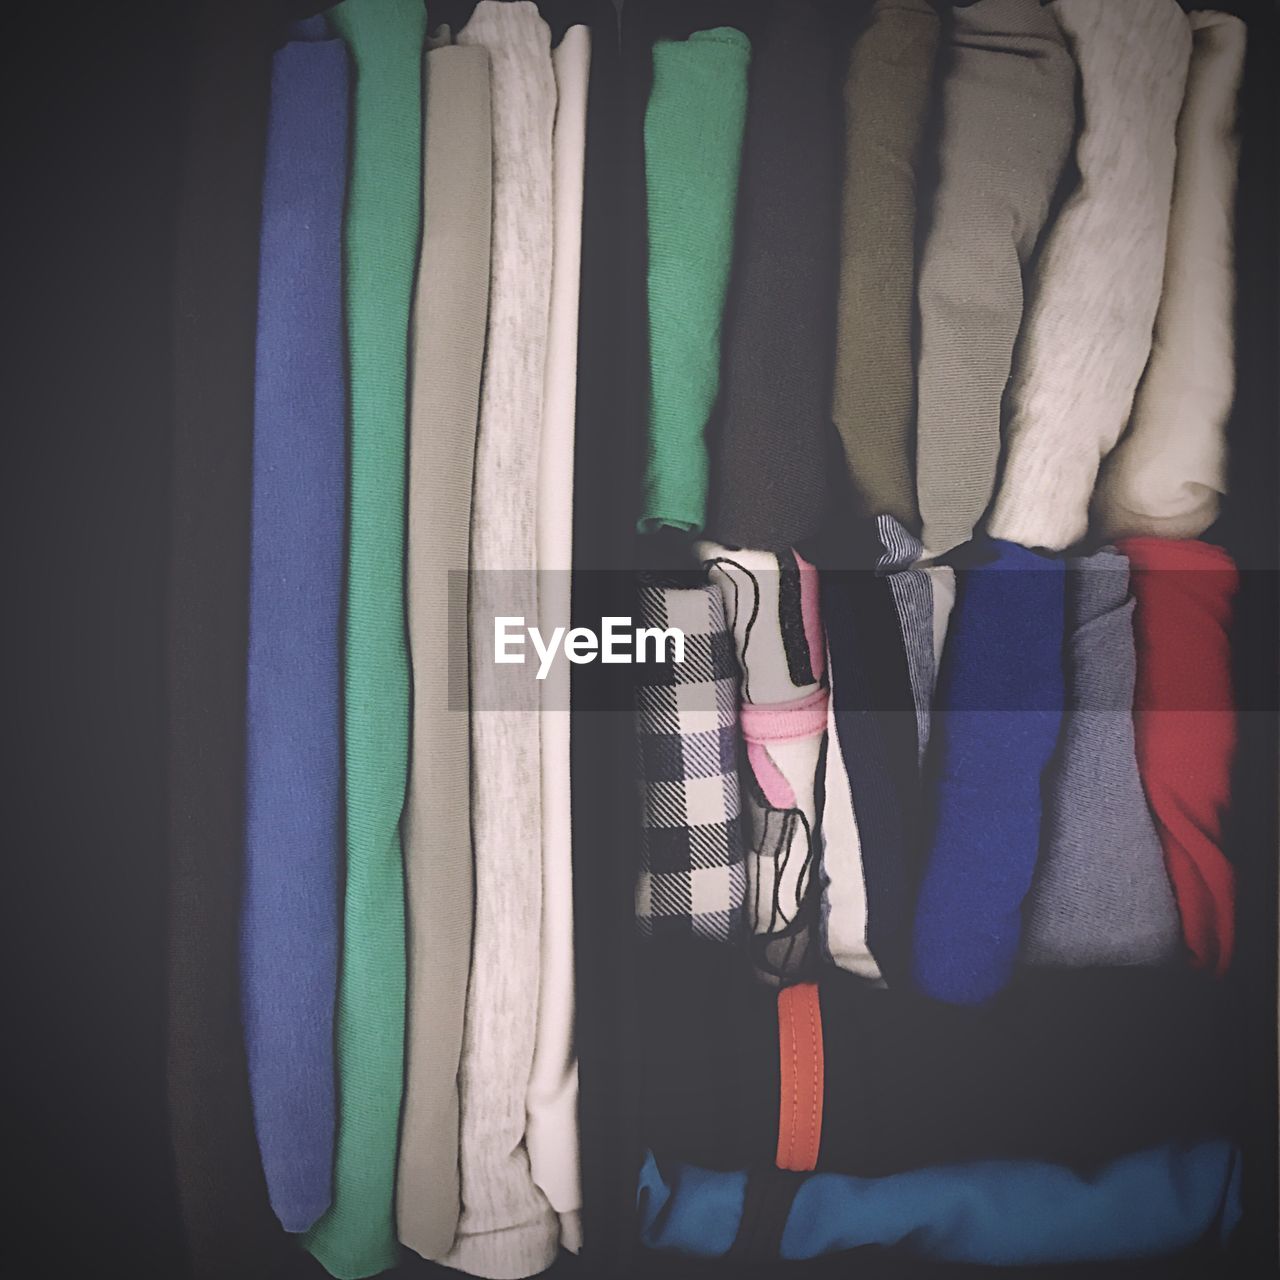 CLOSE-UP OF MULTI COLORED CLOTHES HANGING ON STORE